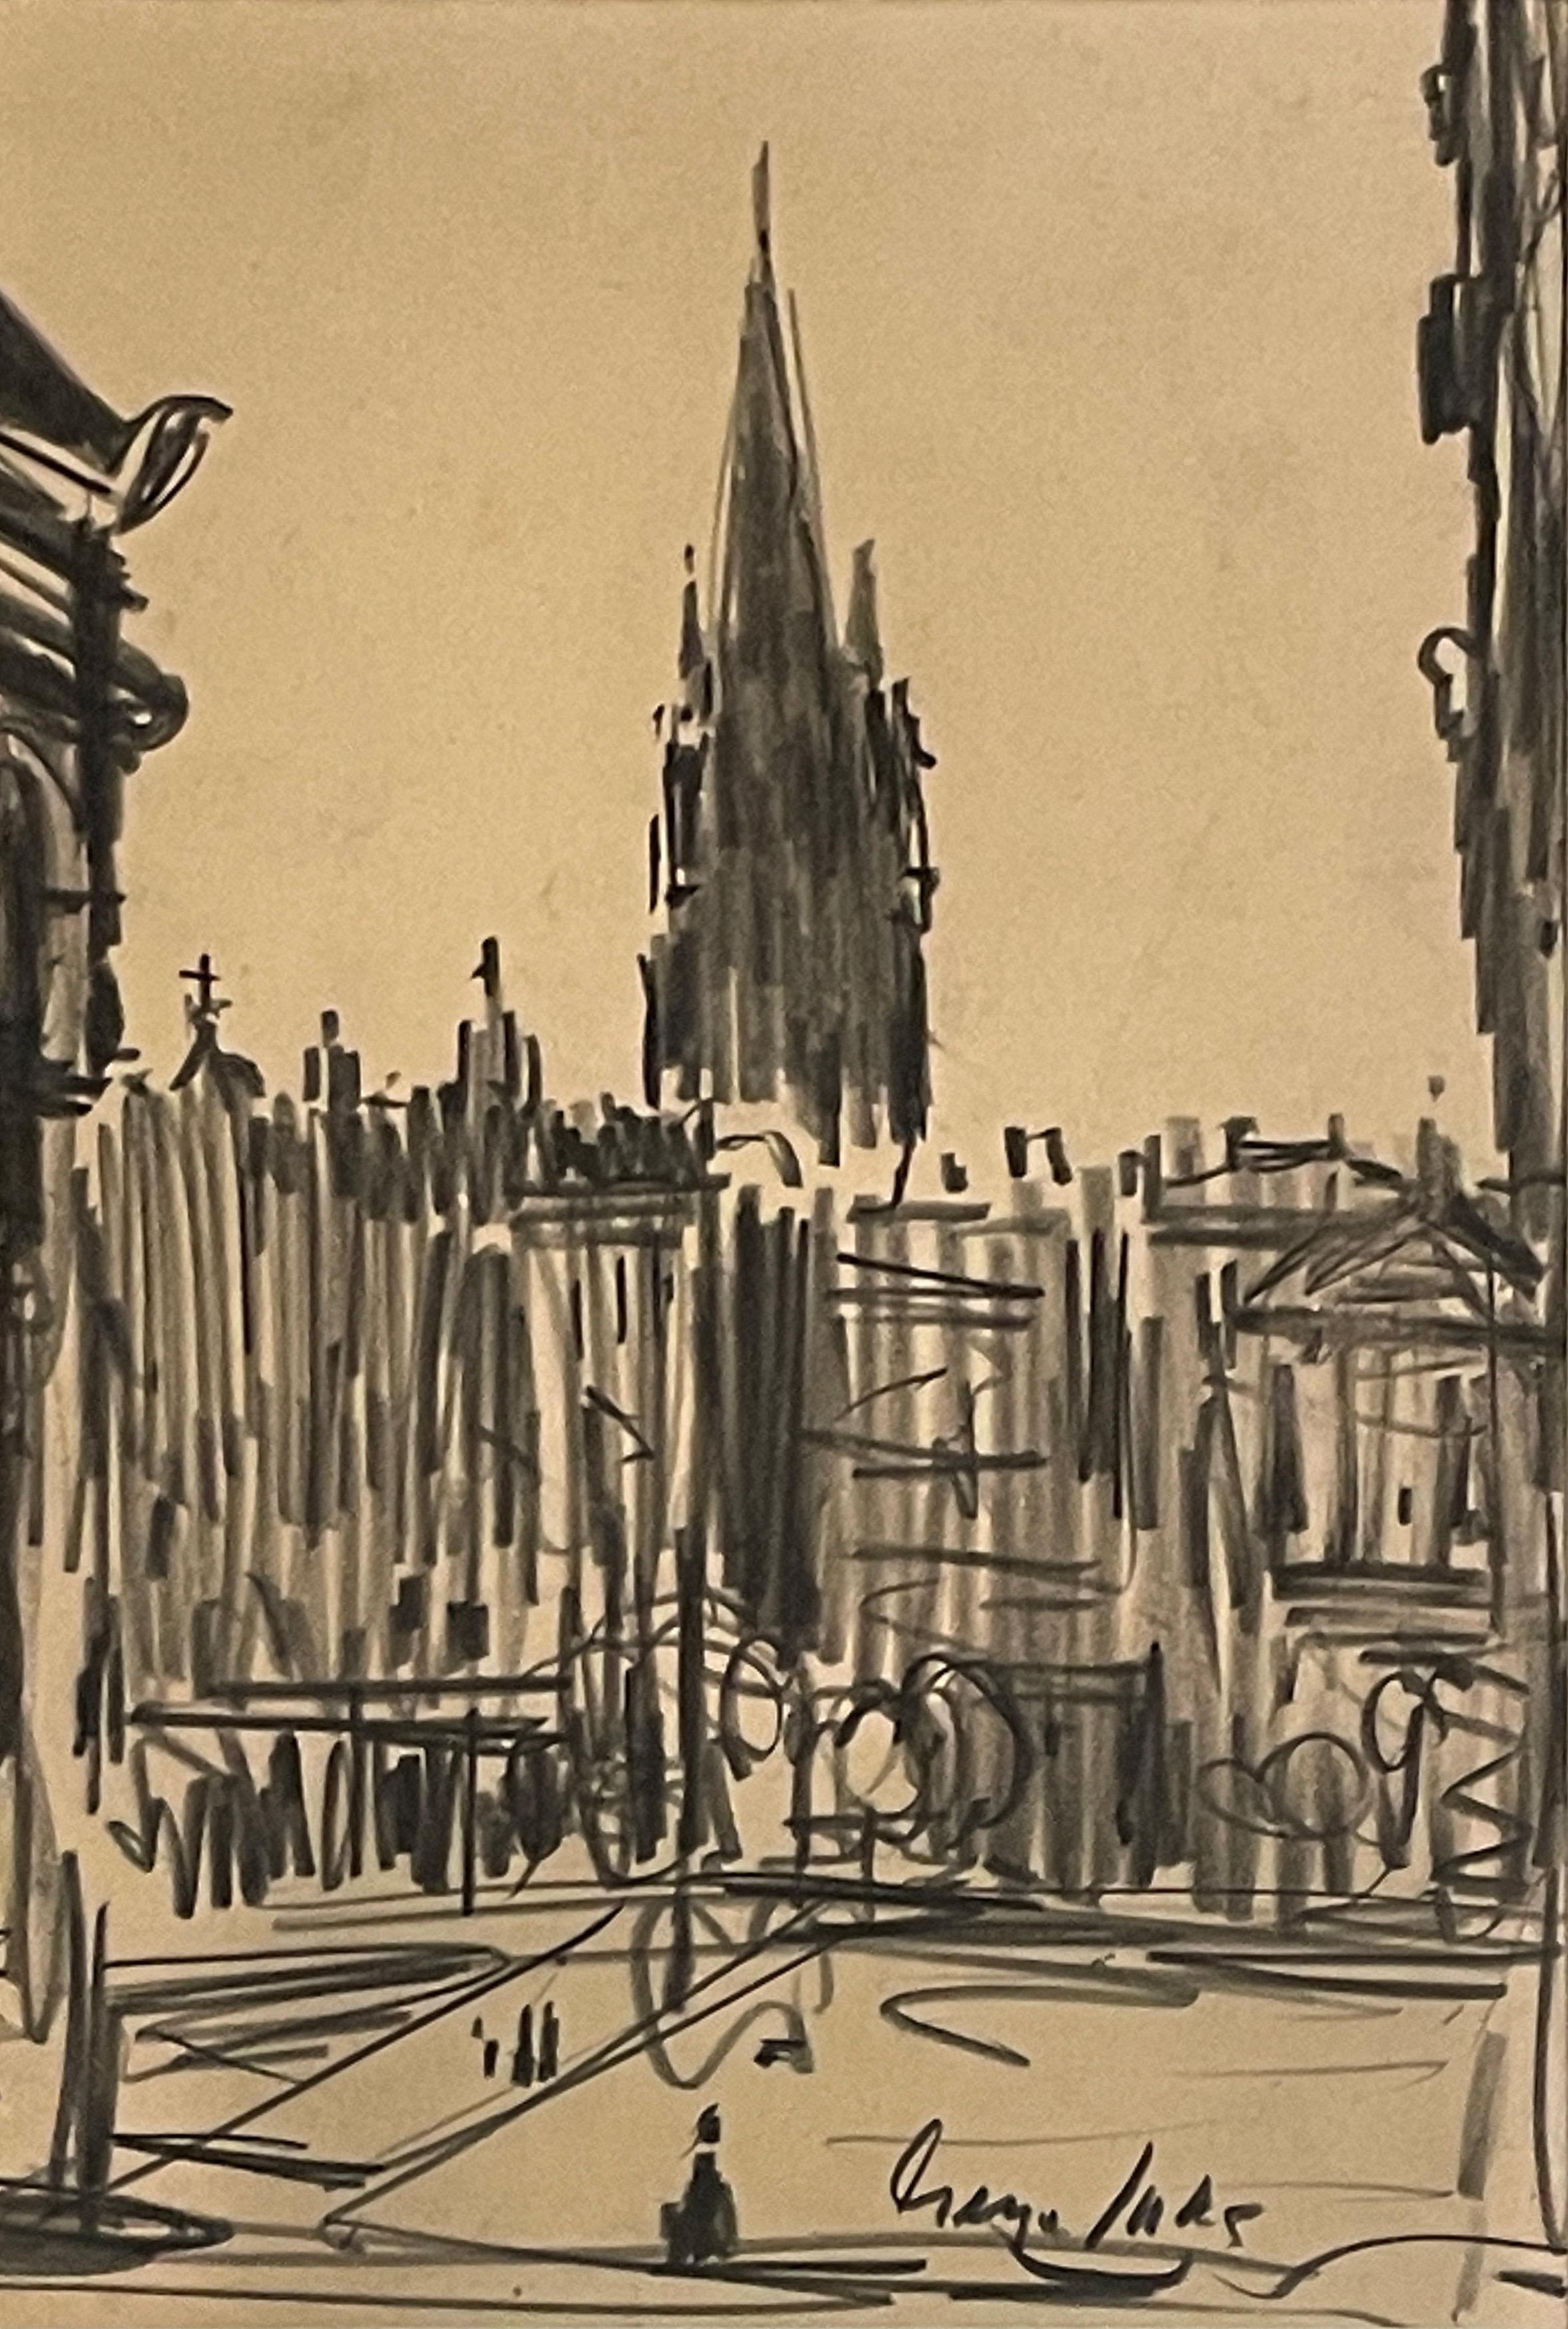 "Building" George Luks, Cityscape, Ashcan School, Gothic Cathedral